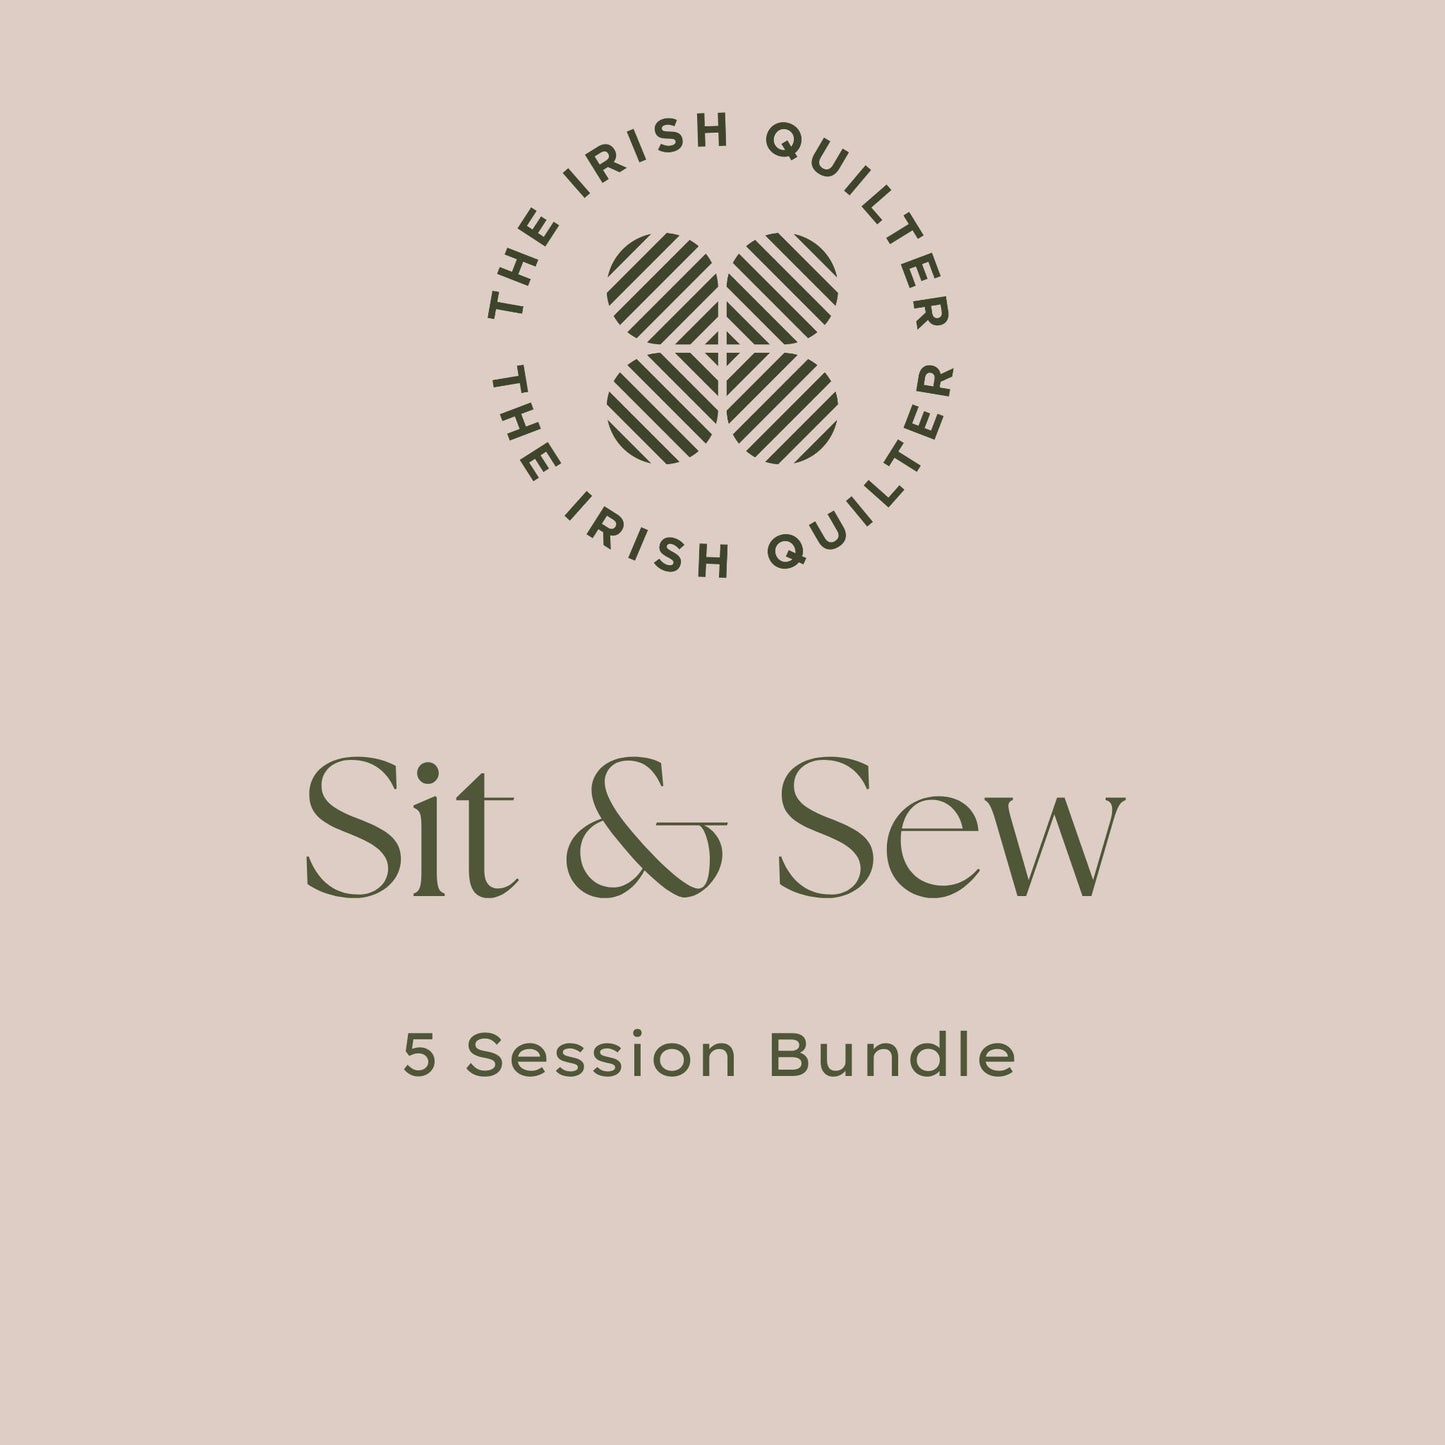 Sit and Sew 5 Session Bundle